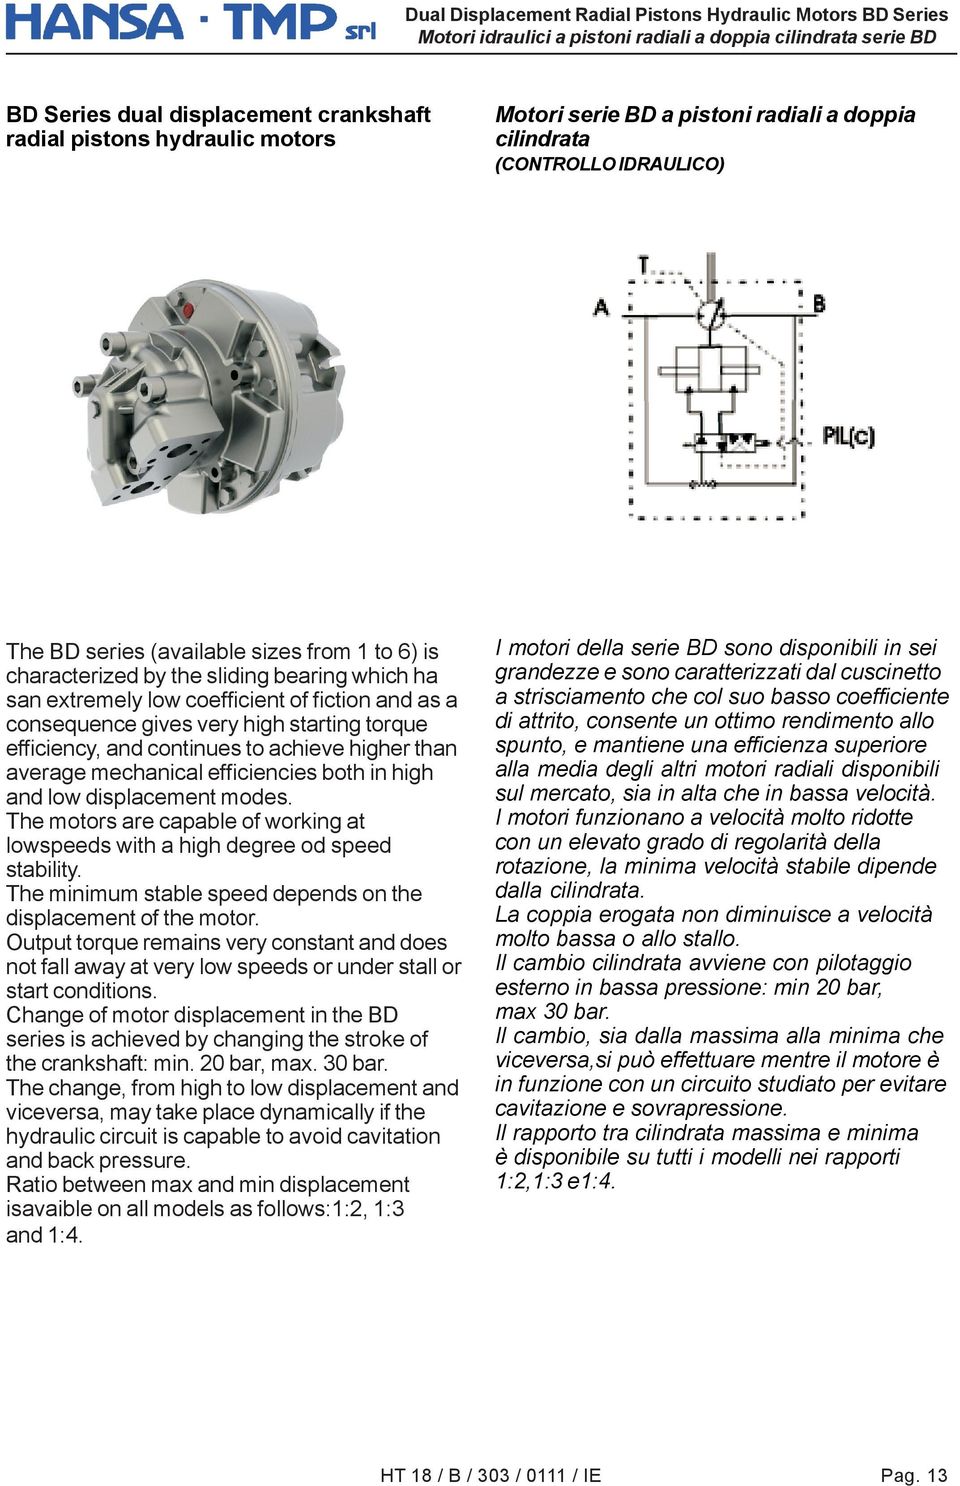 mechanical efficiencies both in high and low displacement modes. The motors are capable of working at lowspeeds with a high degree od speed stability.